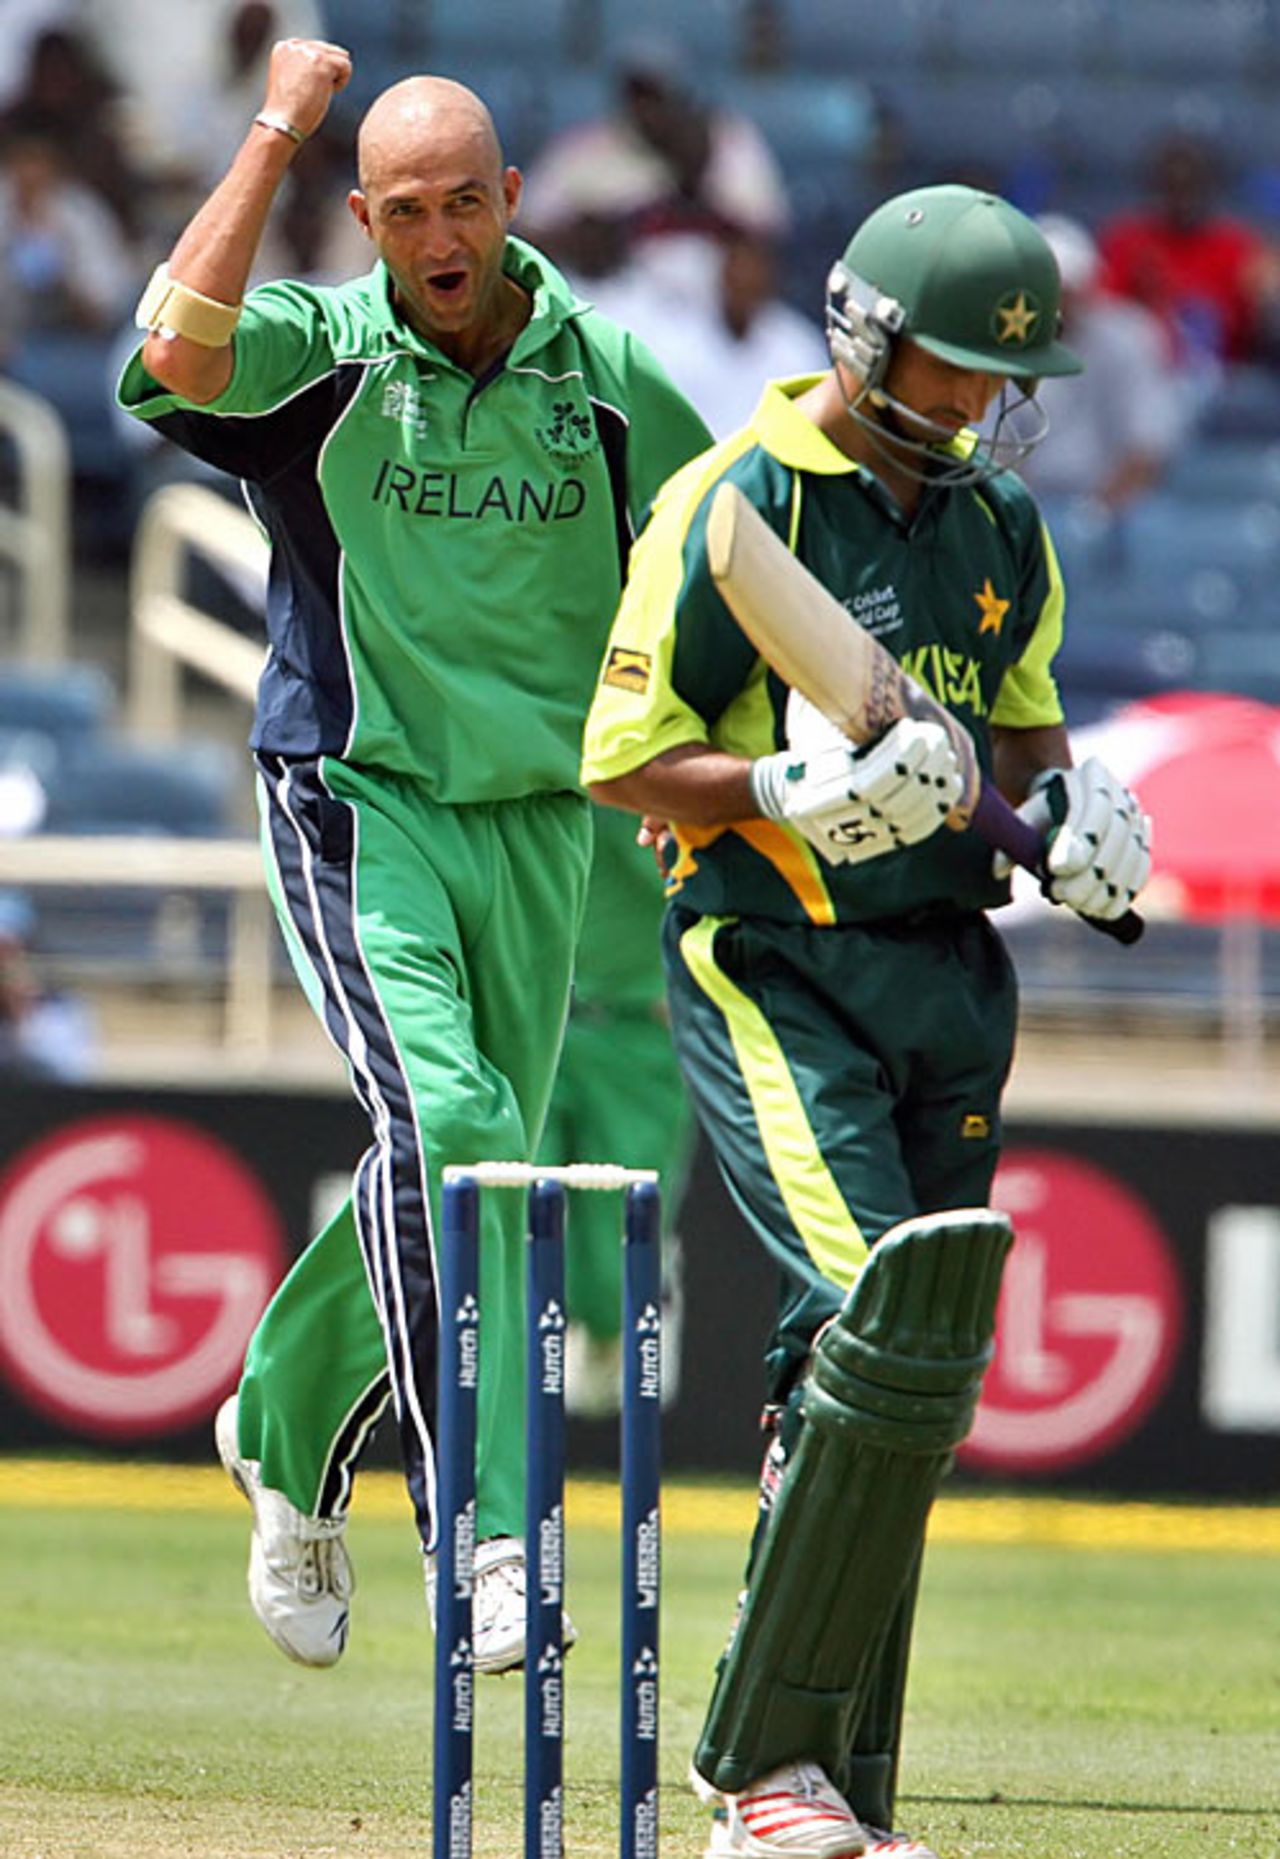 Andre Botha pumps his fist after dismissing Imran Nazir, Ireland v Pakistan, Group D, Jamaica, March 17, 2007